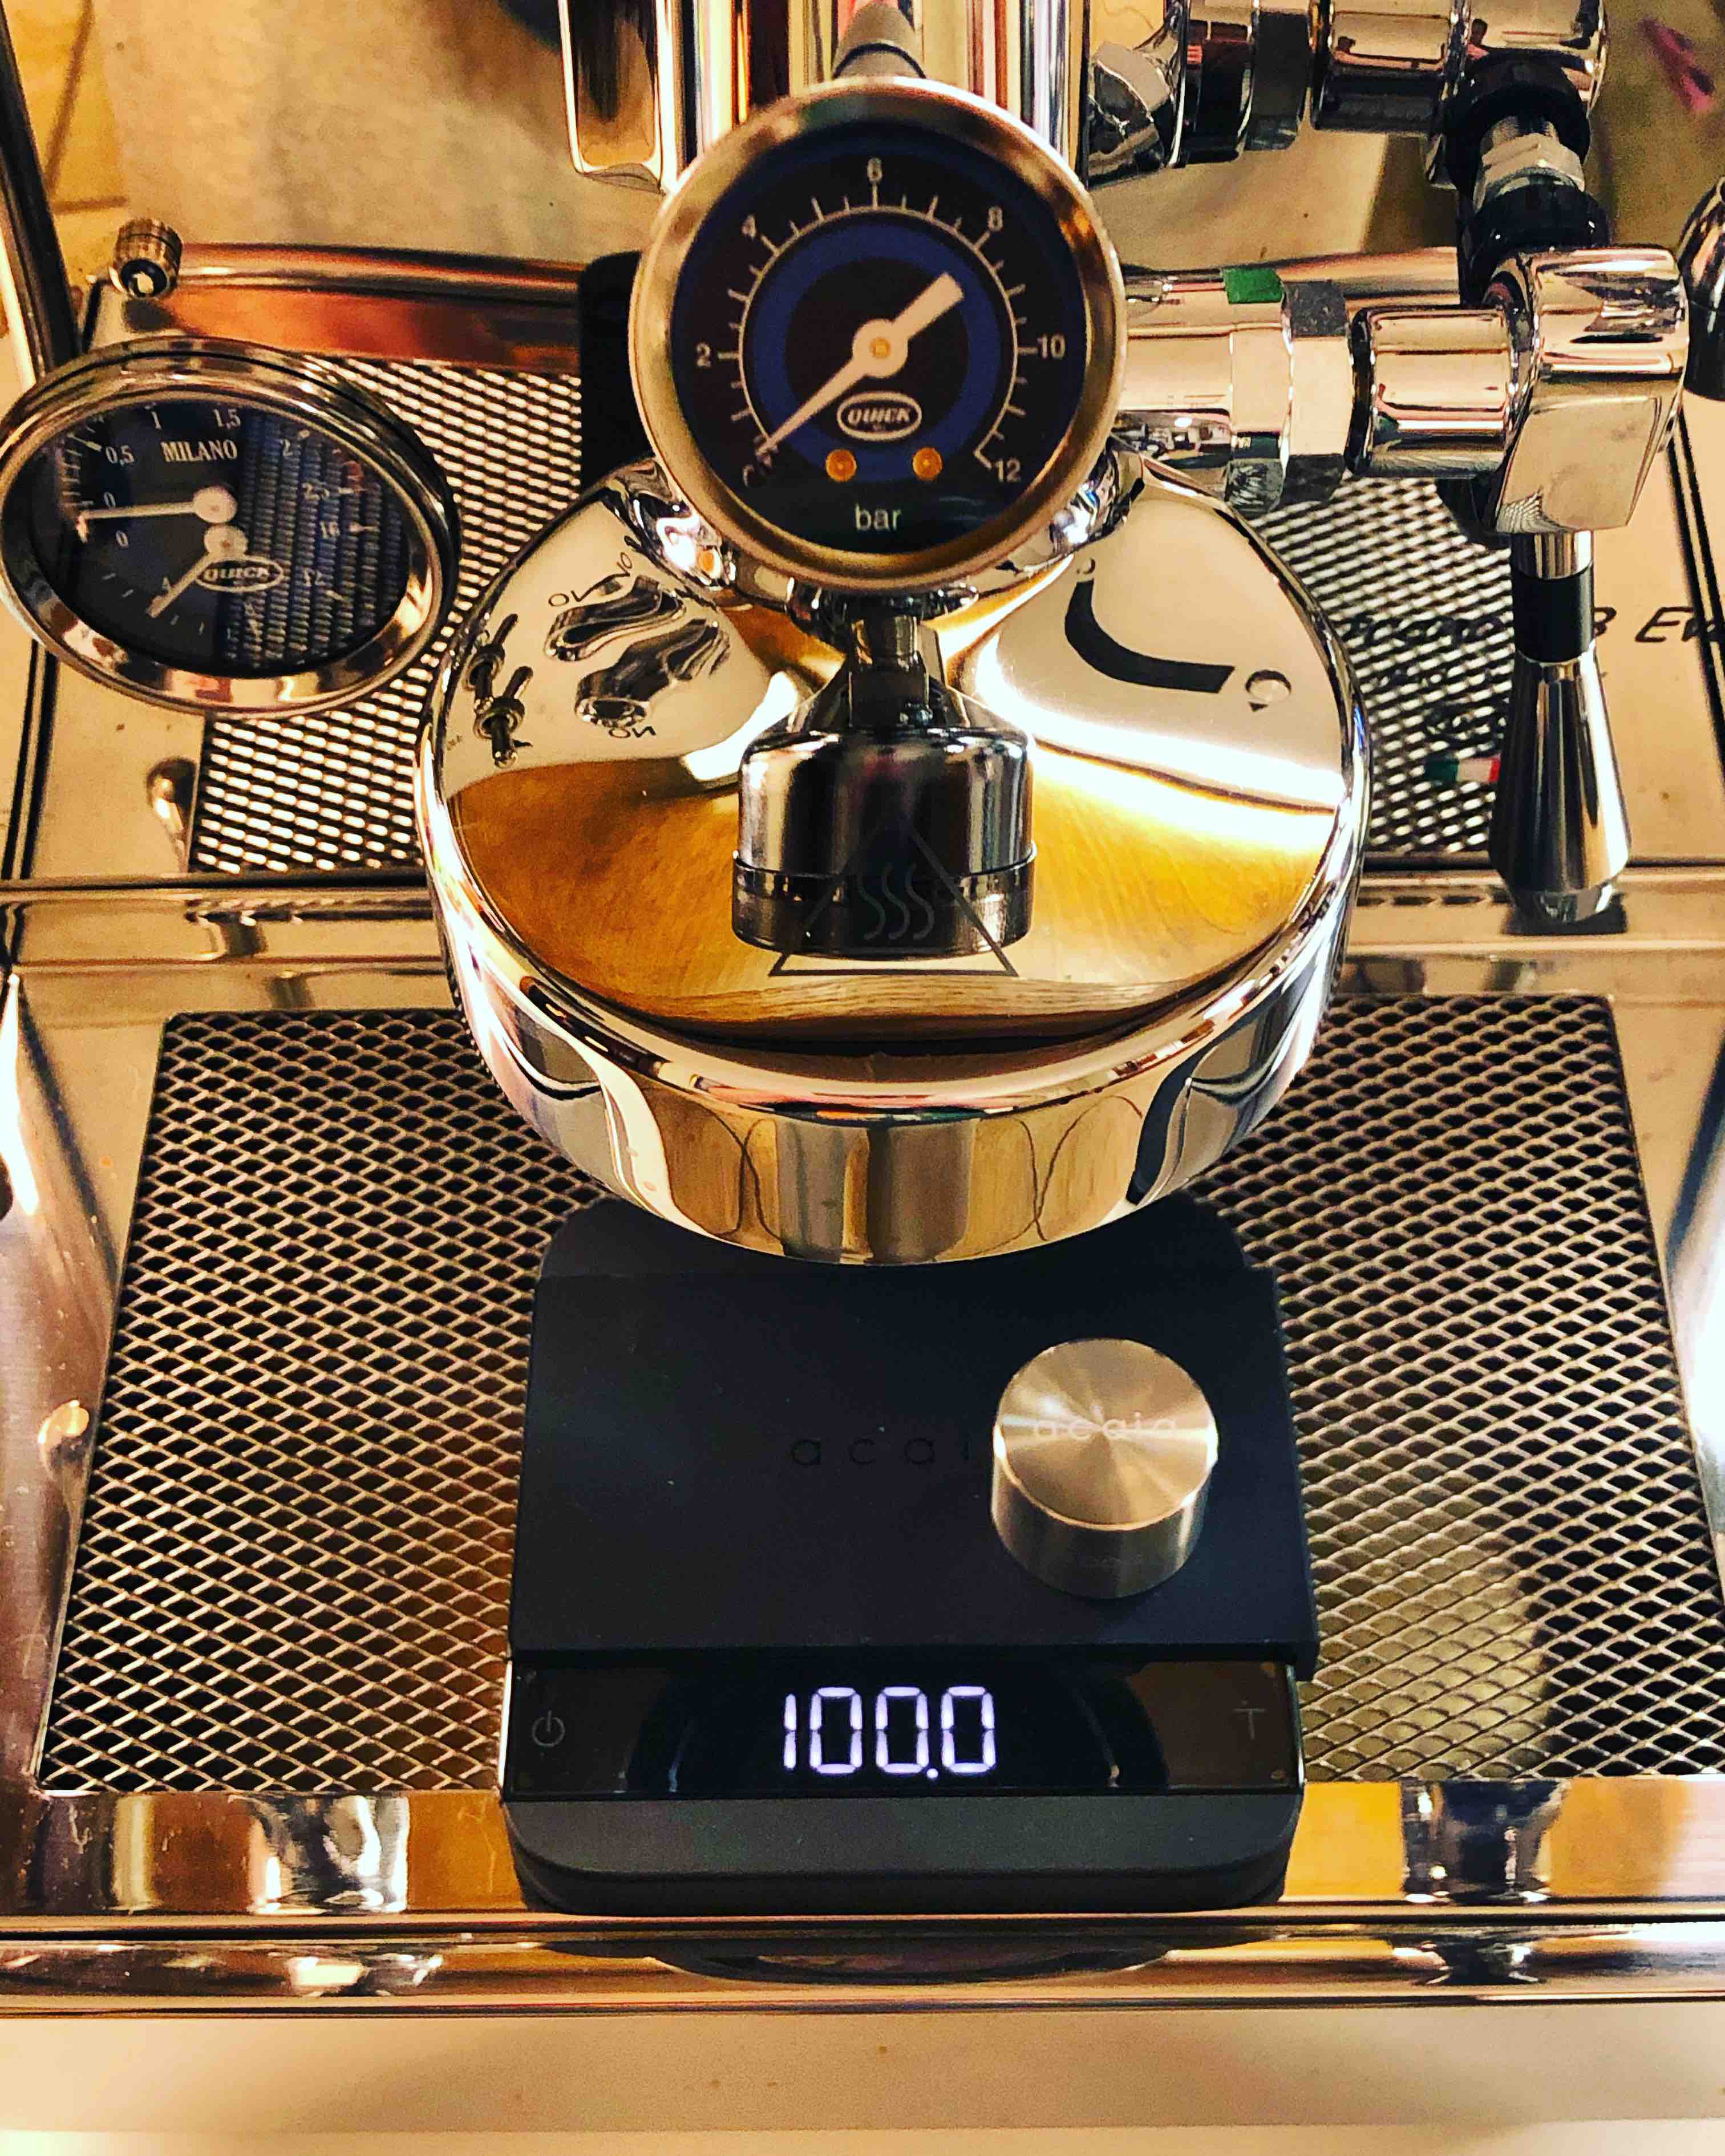 Acaia Lunar Scale - In Depth Review - Espresso Outlet LLC